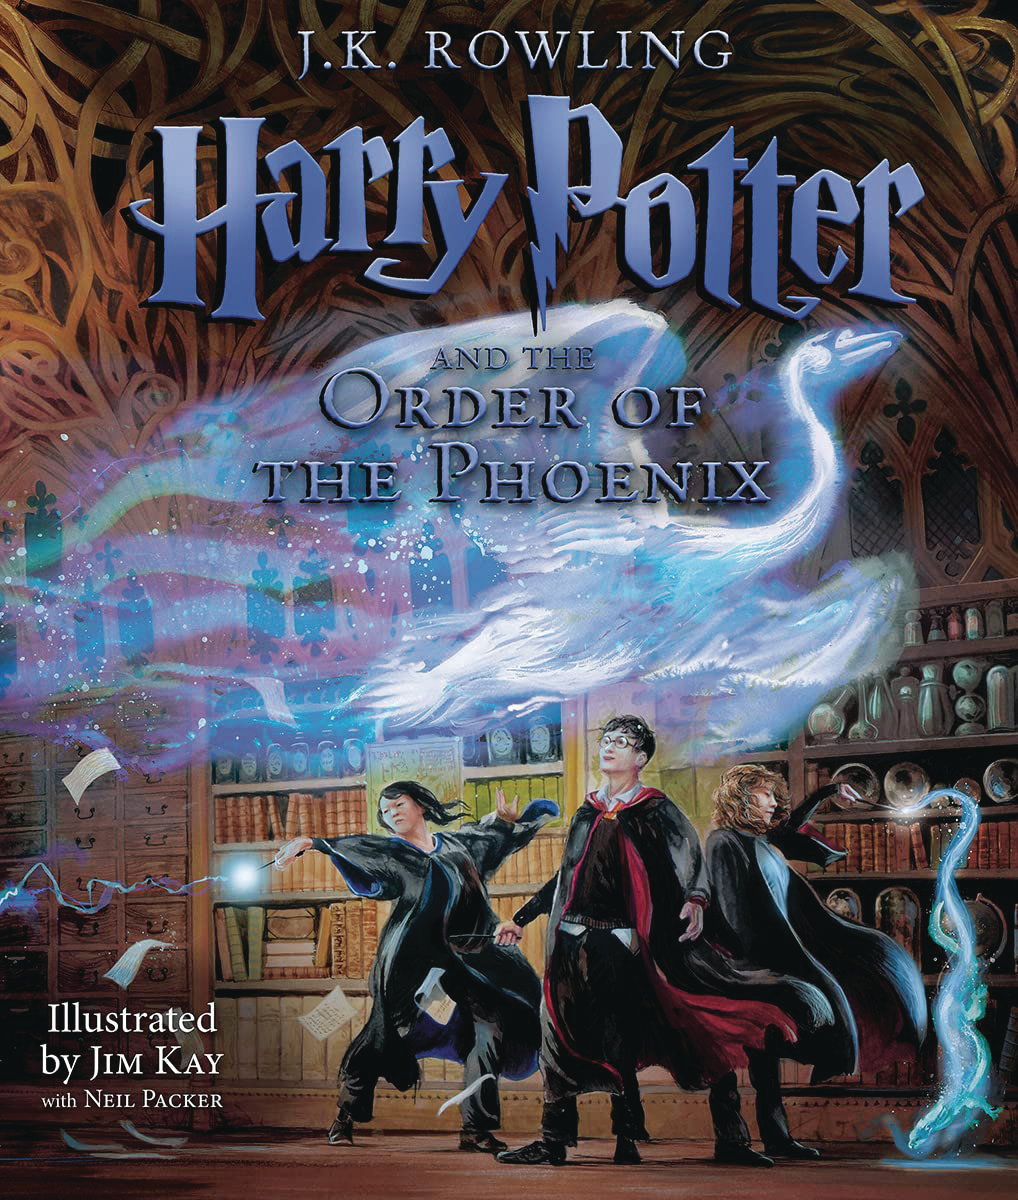 Harry Potter & Order of Phoenix Illustrated Hardcover Edition